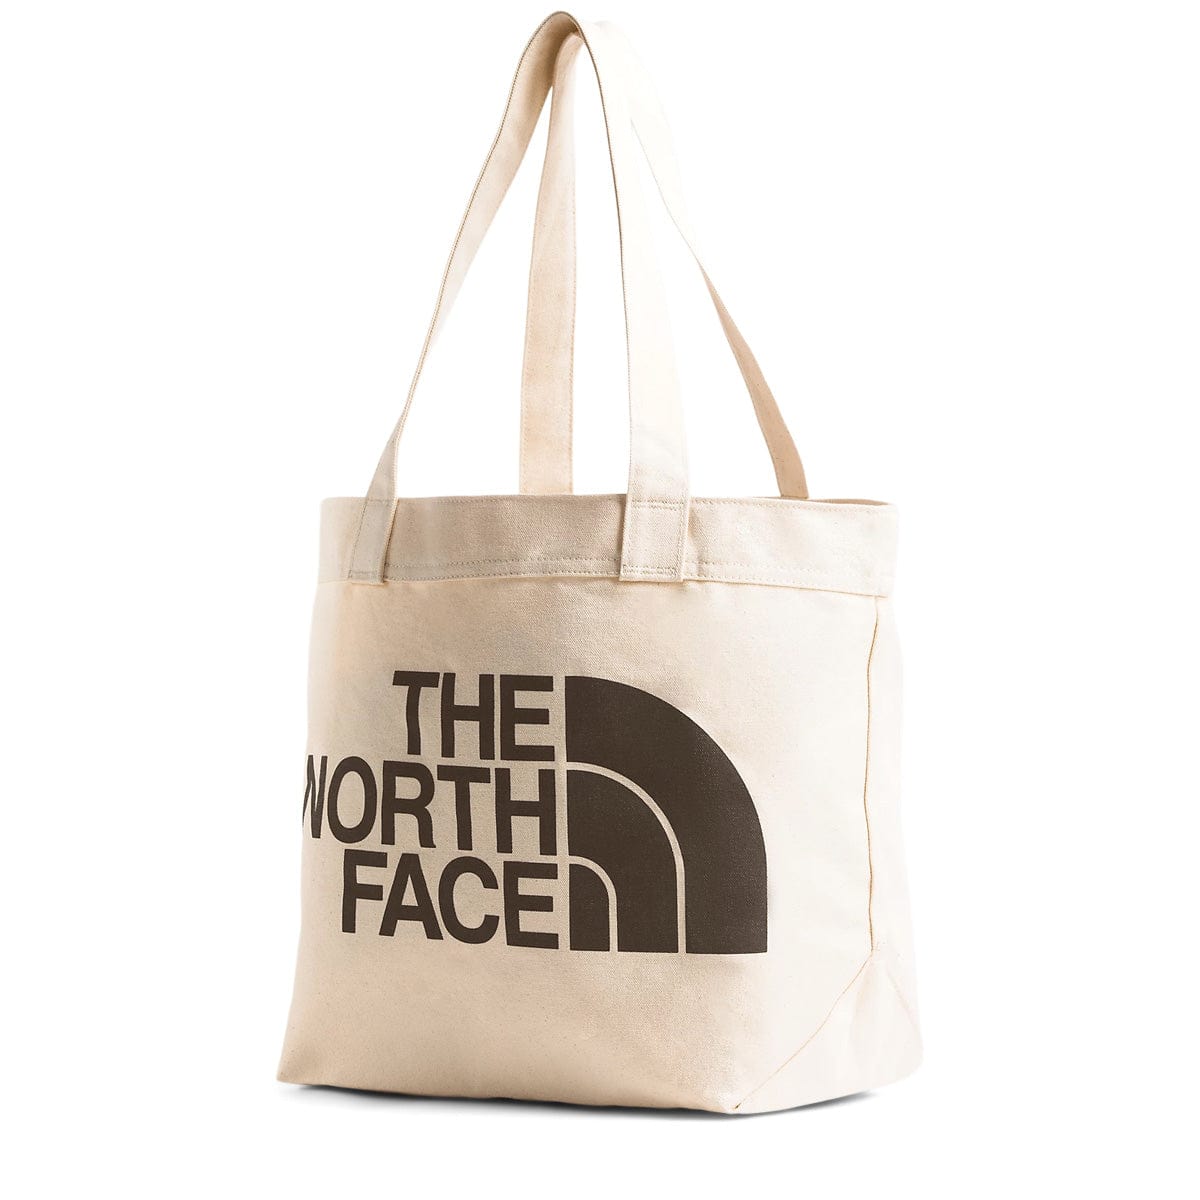 The North Face Bags WEIMARANER BROWN LARGE LOGO PRINT / O/S COTTON TOTE